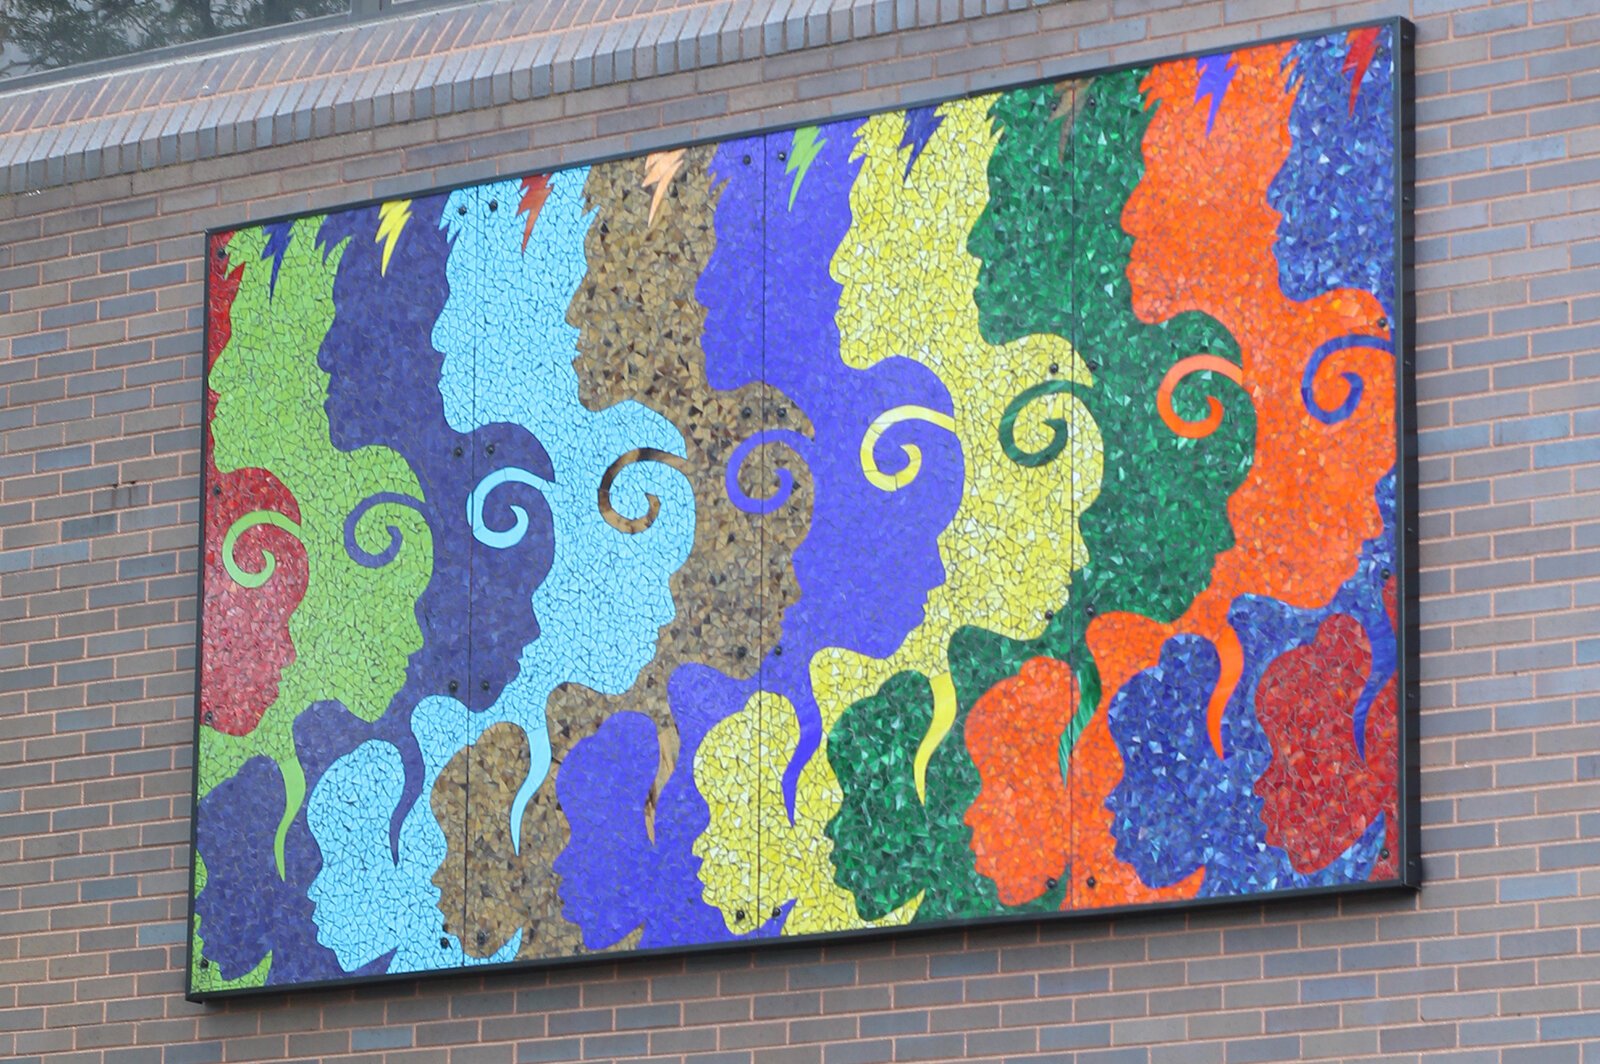 The new mosaic mural at 301 W. Michigan Ave. in Ypsilanti.